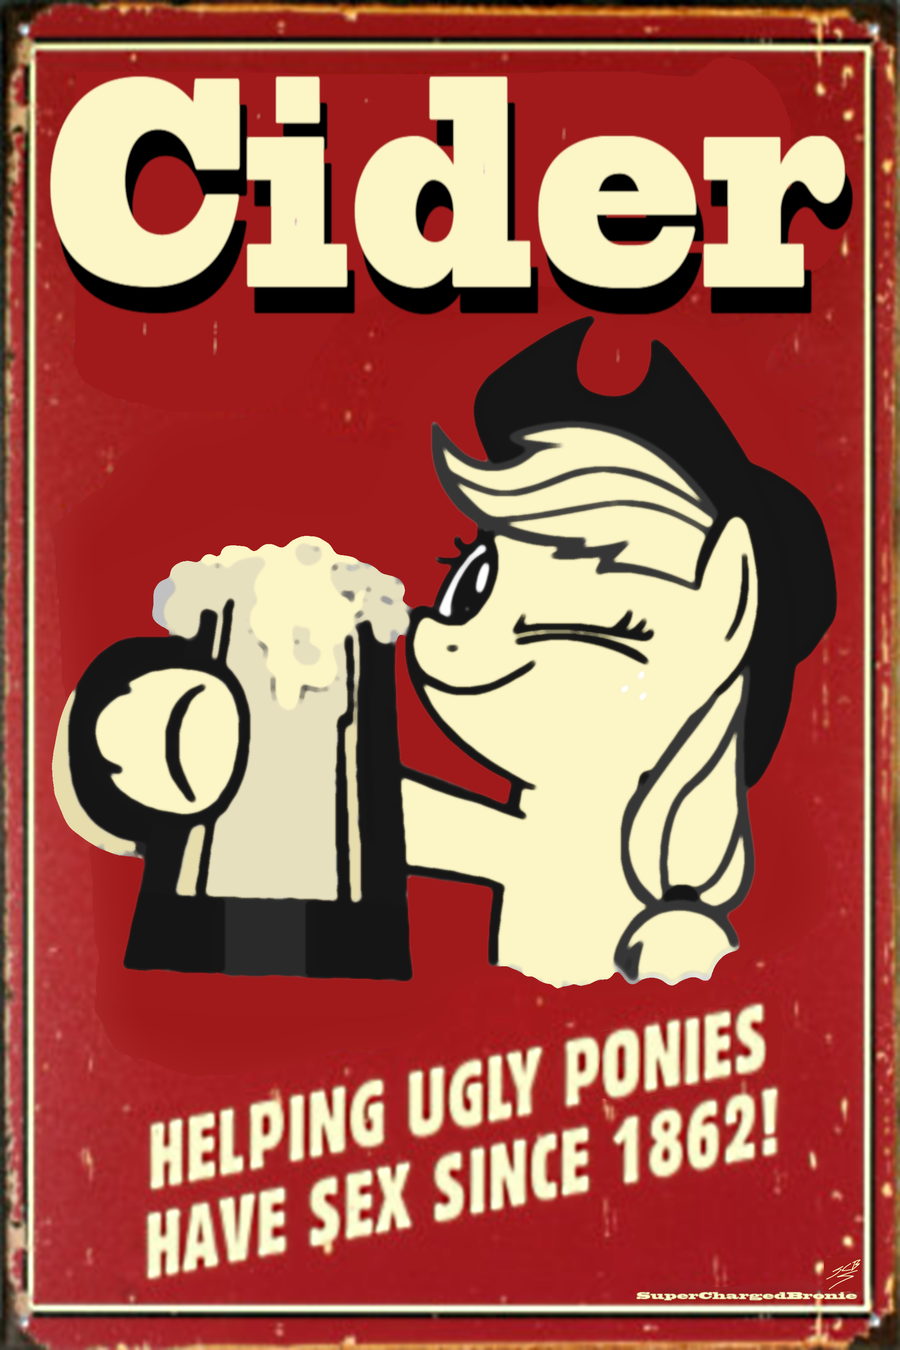 applejack_and_the_cider_poster_by_superc